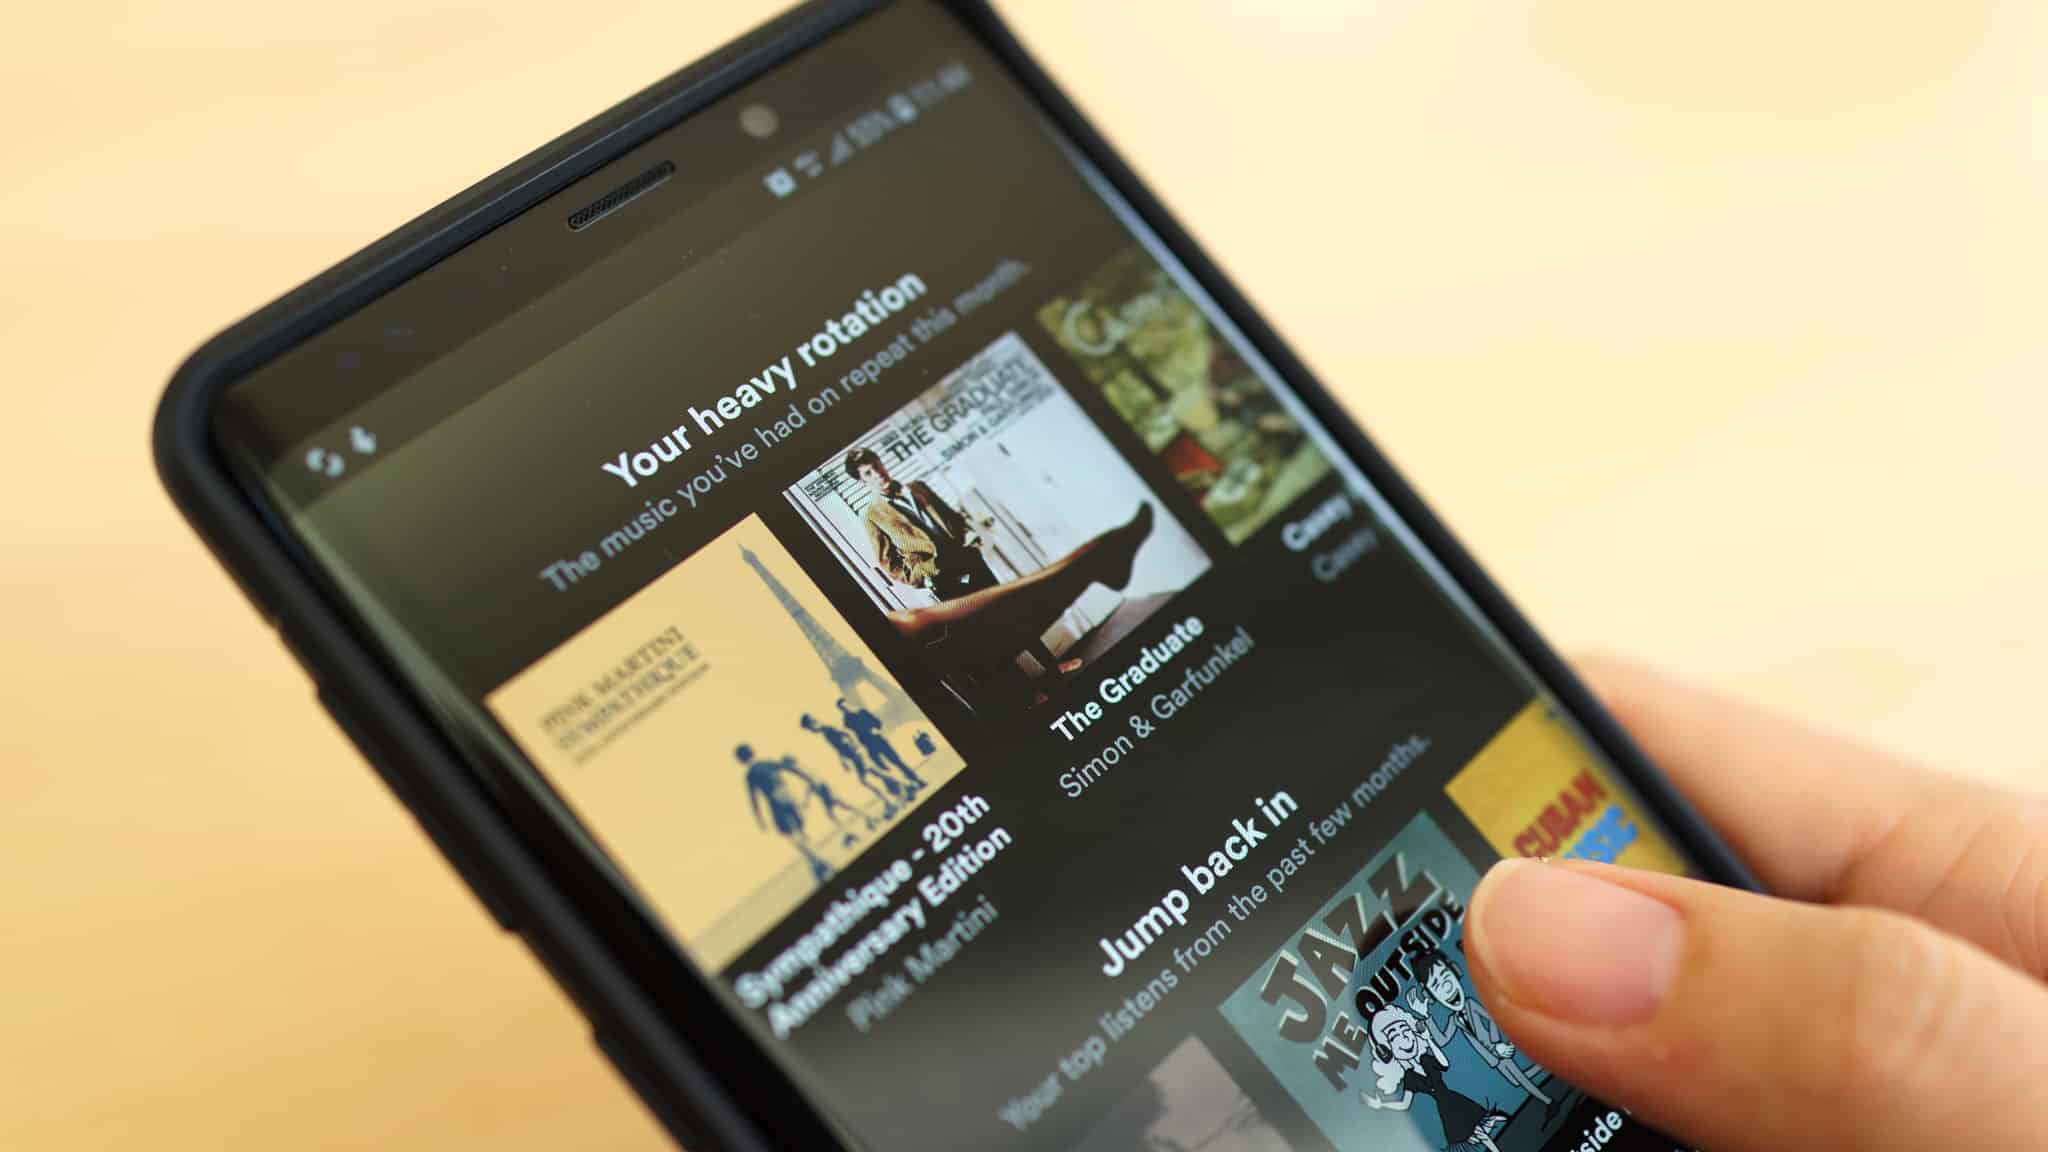 New EU Law Could Pave the Way for Spotify’s In-App Purchases